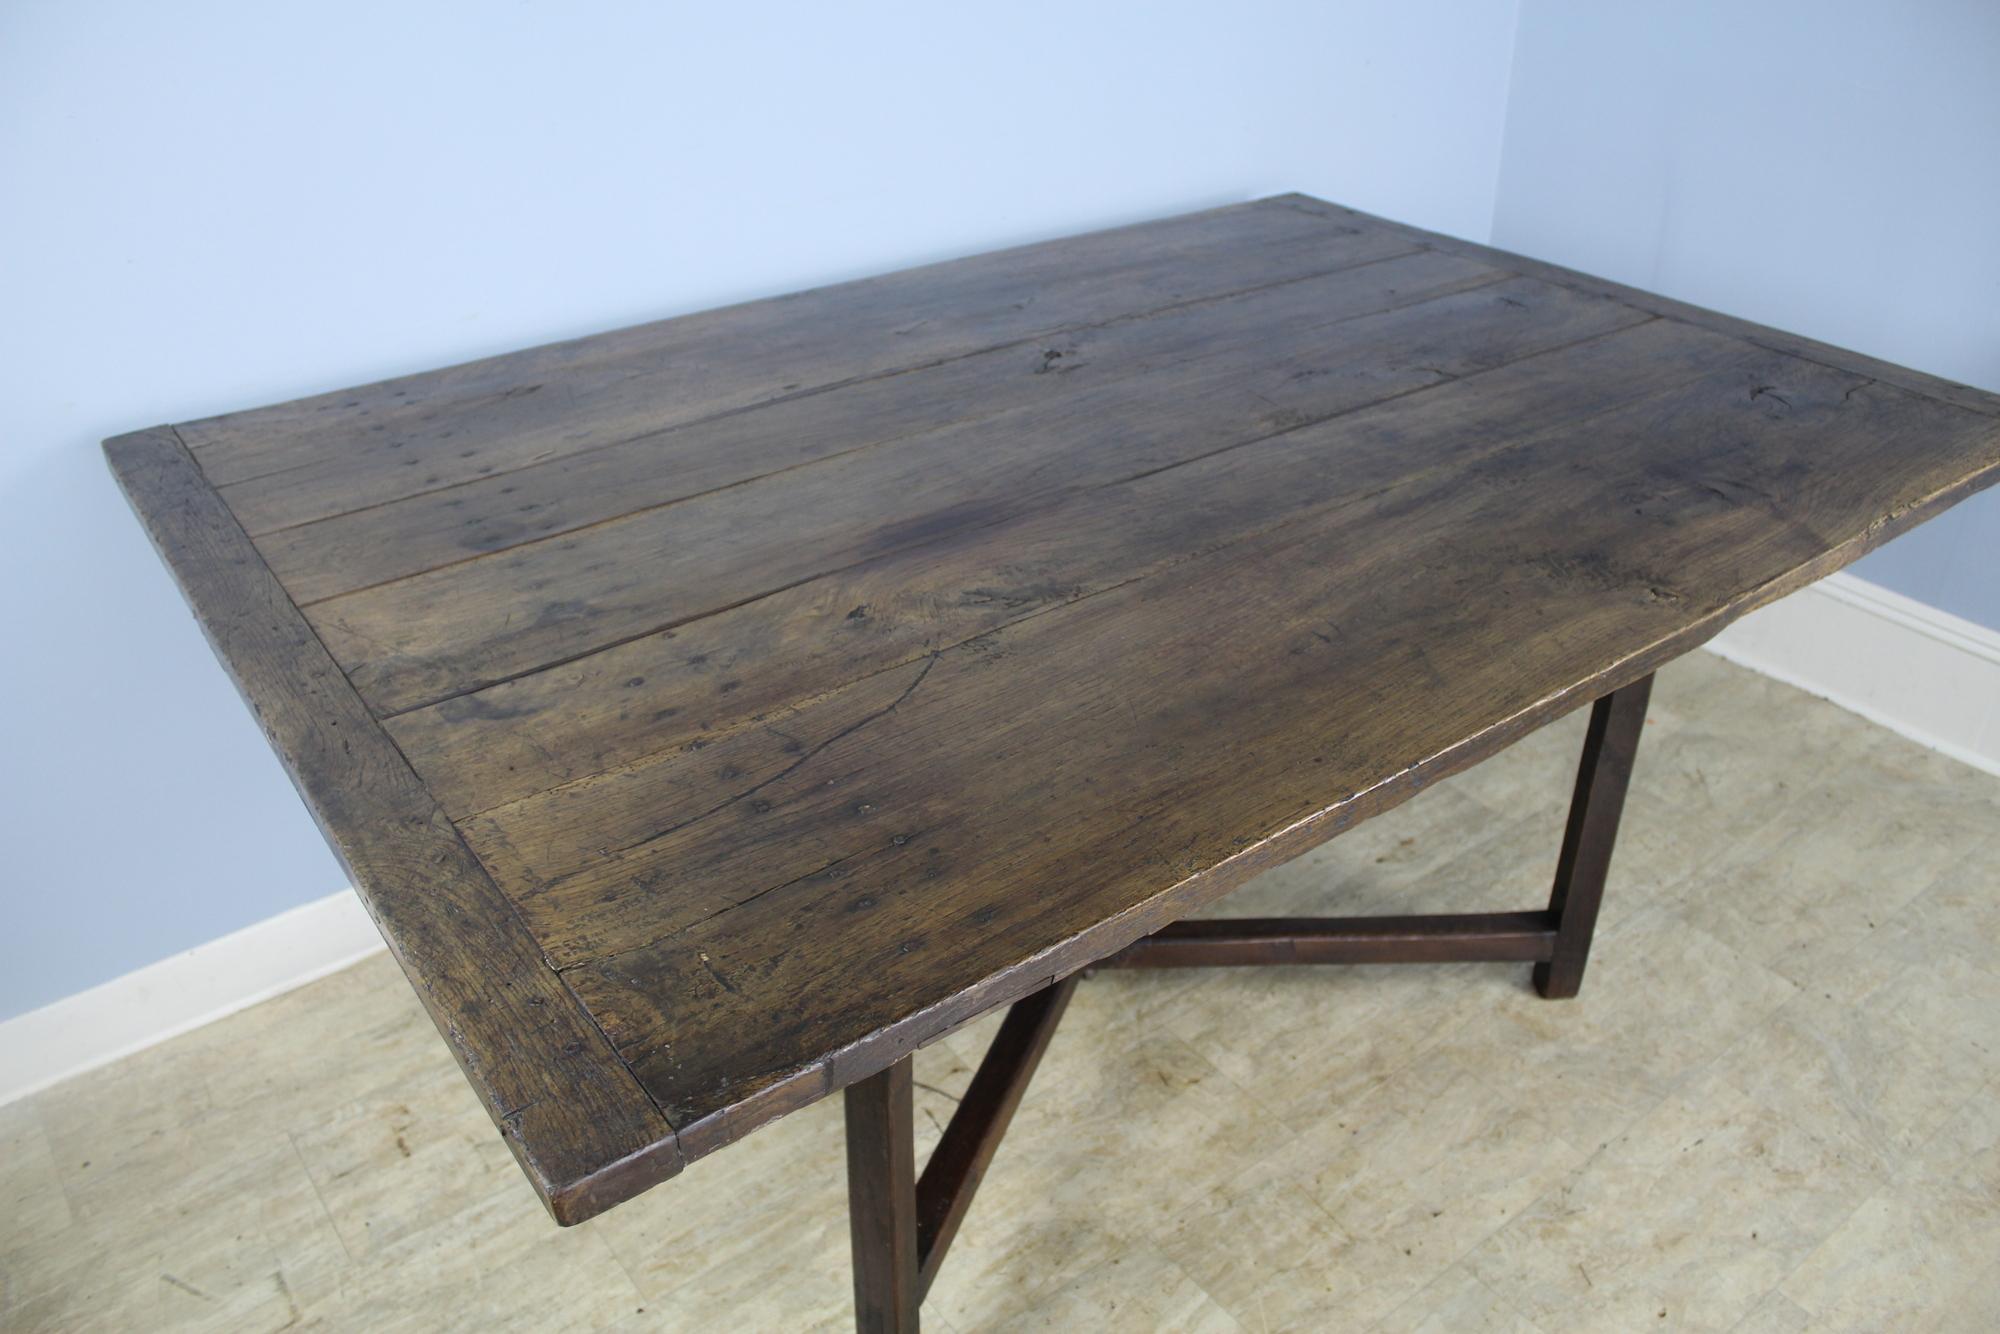 A rustic X based farm table with wonderful distressed patina and color. Bread board ends and interesting natural grain. With no legs or apron to get in the way, this table seats 8 comfortably. Formerly a folding table, the legs have been fixed into